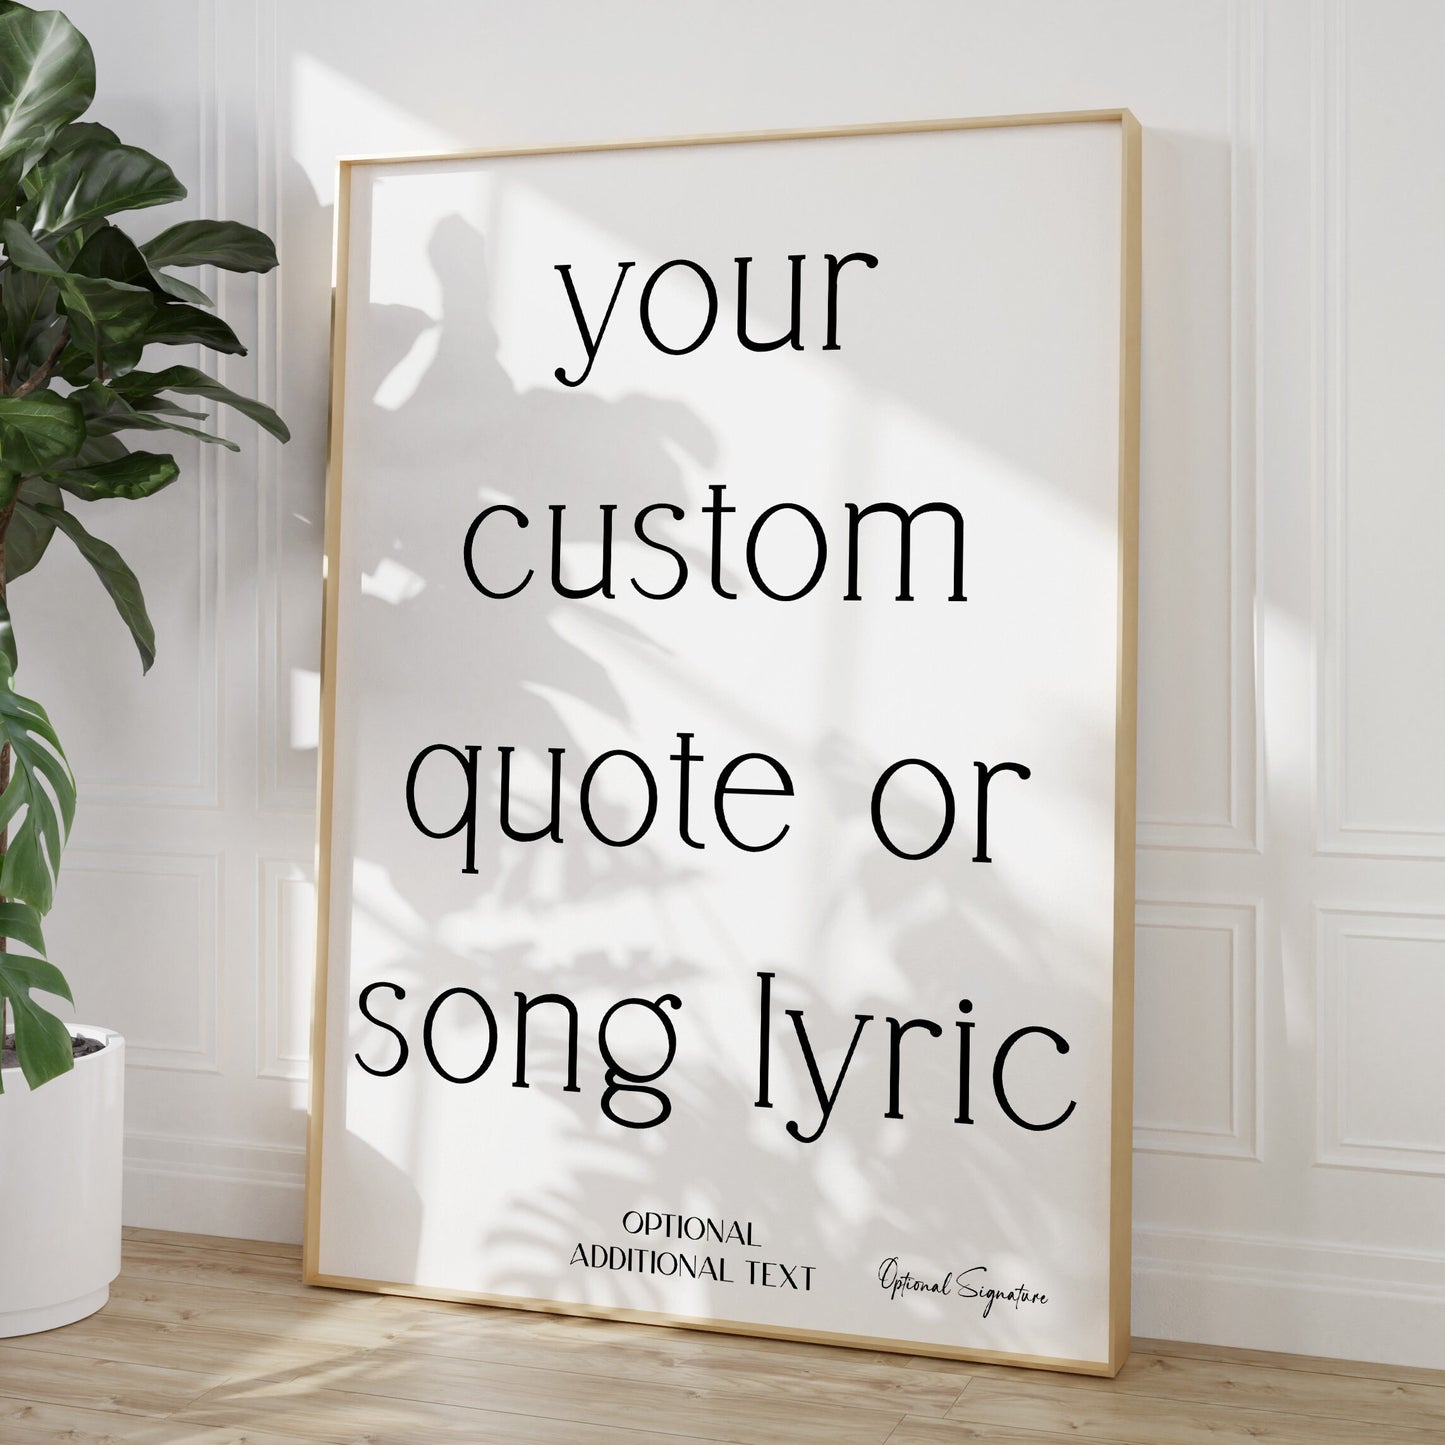 Custom Quote Or Song Lyric Print - Magic Posters